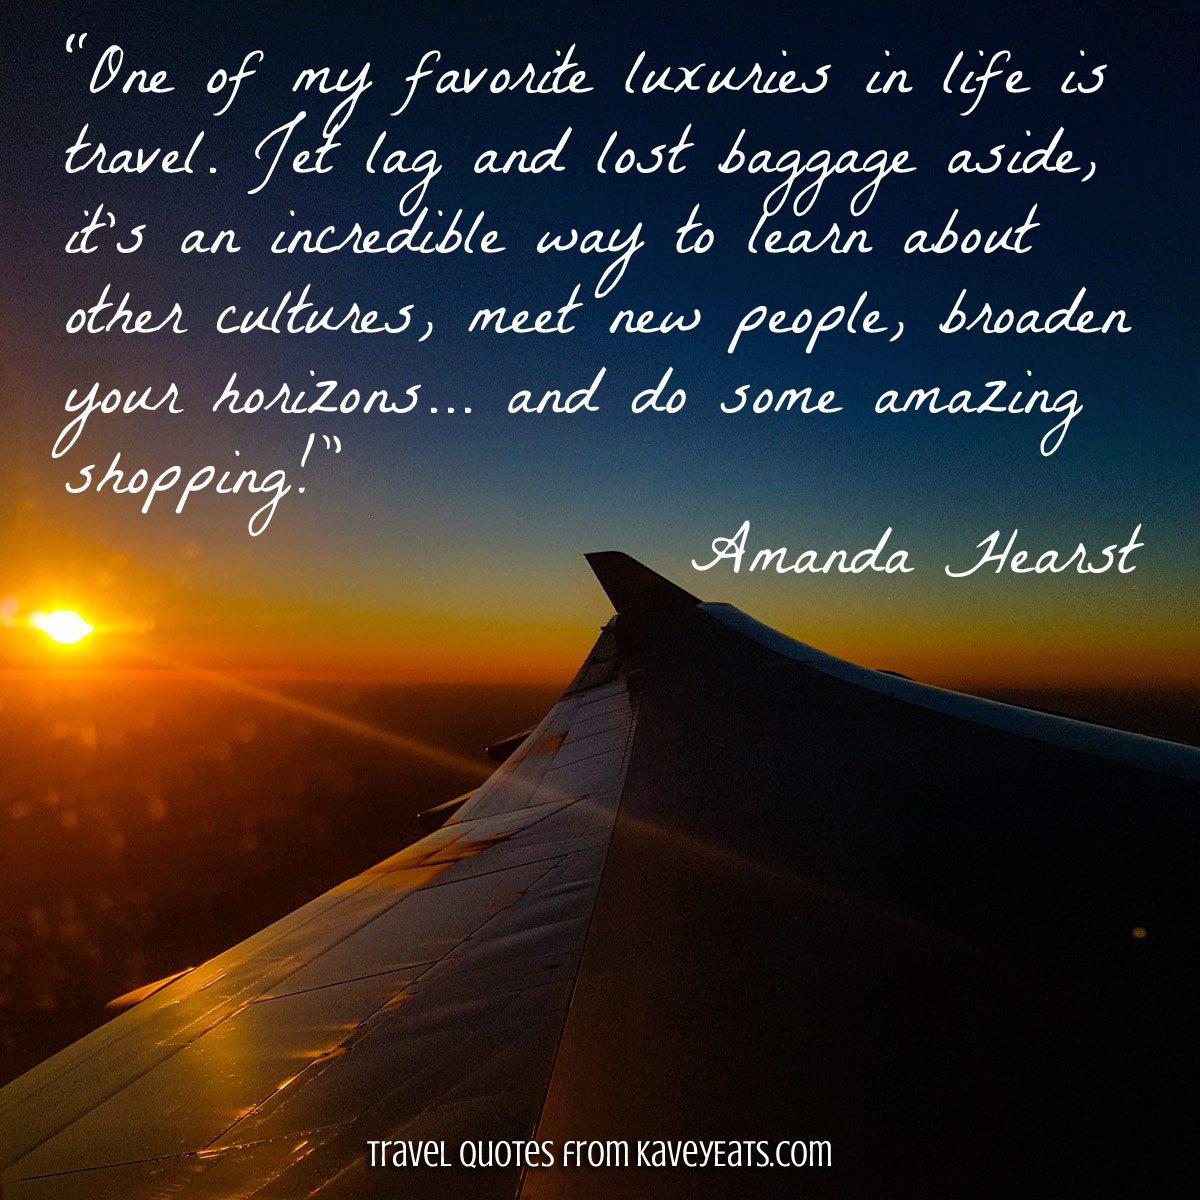 “One of my favorite luxuries in life is travel. Jet lag and lost baggage aside, it's an incredible way to learn about other cultures, meet new people, broaden your horizons... and do some amazing shopping!” Amanda Hearst